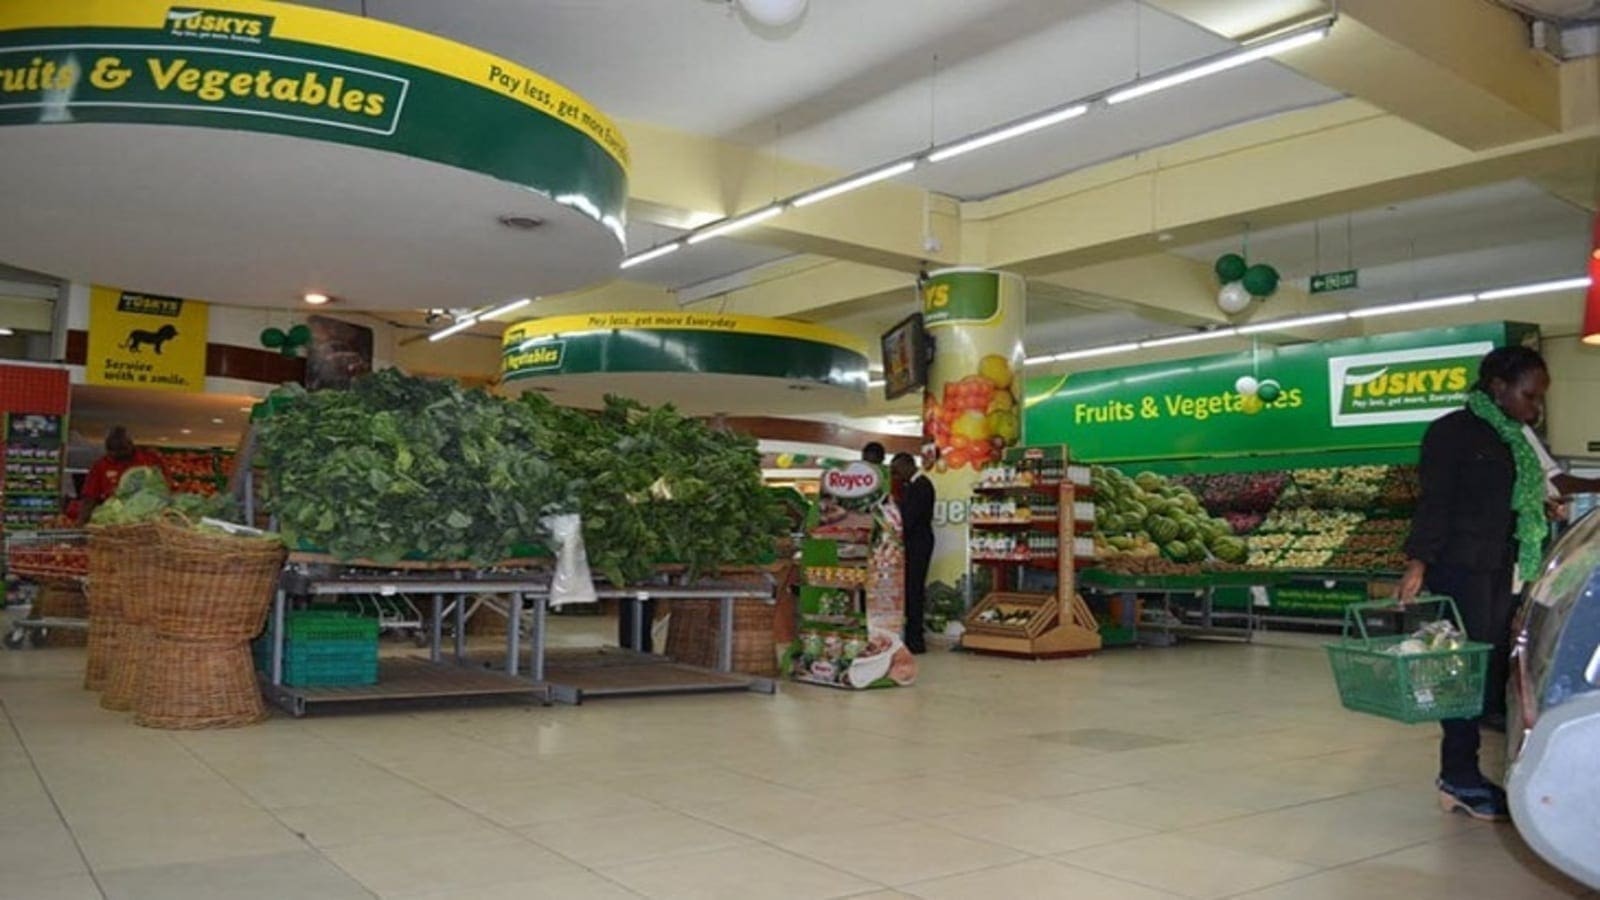 Tuskys appoints former Uchumi finance boss as its new Chief Financial Officer